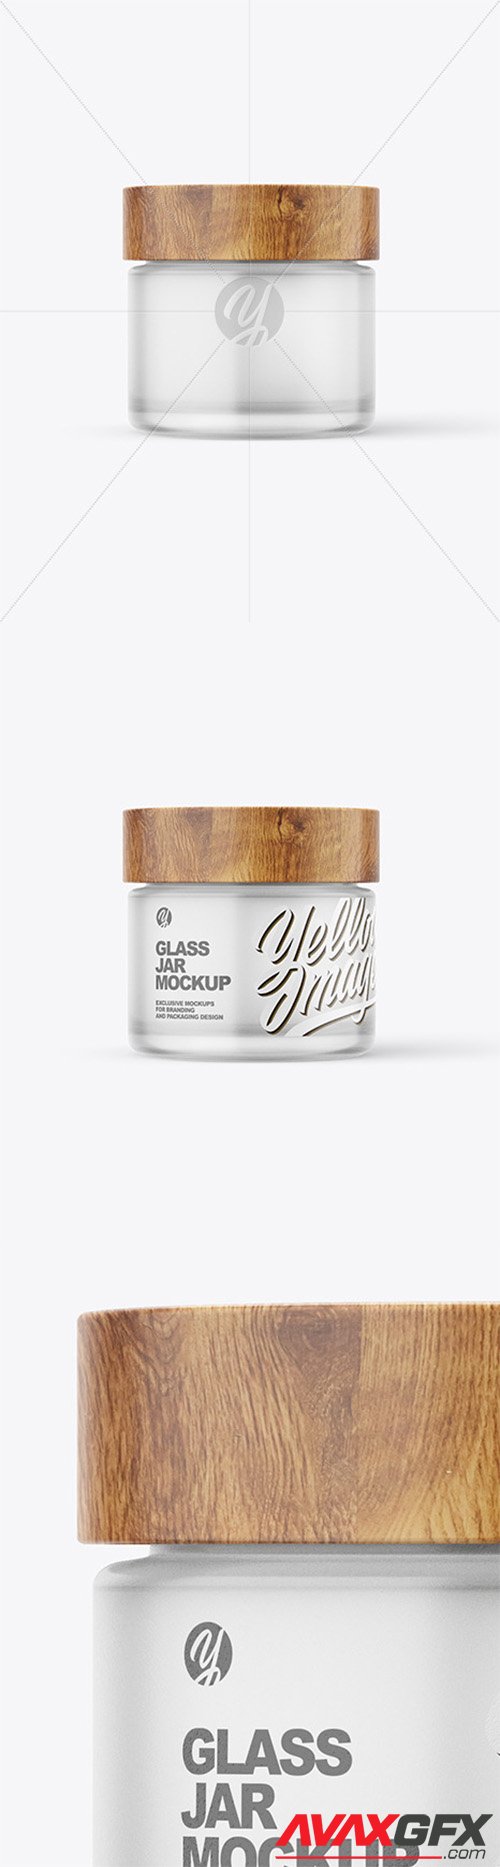 60ml Frosted Glass Jar W/ Wooden Lid Mockup 80171